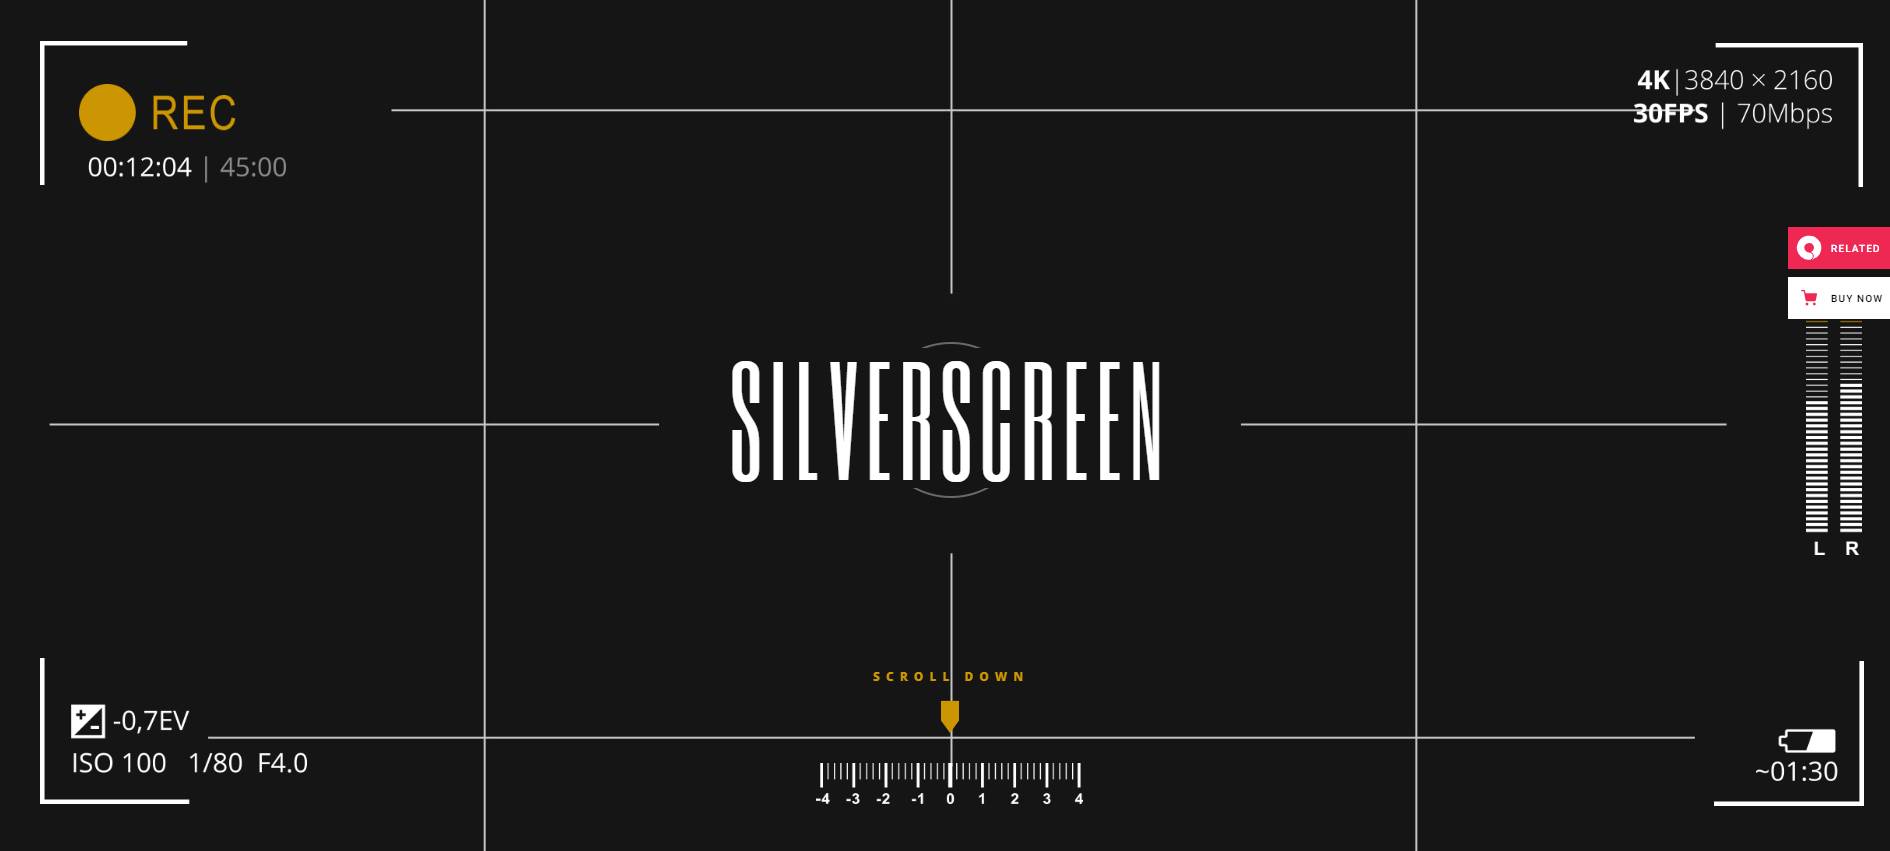 Silverscreen - A Theme for Movies, Filmmakers, and Production Companies